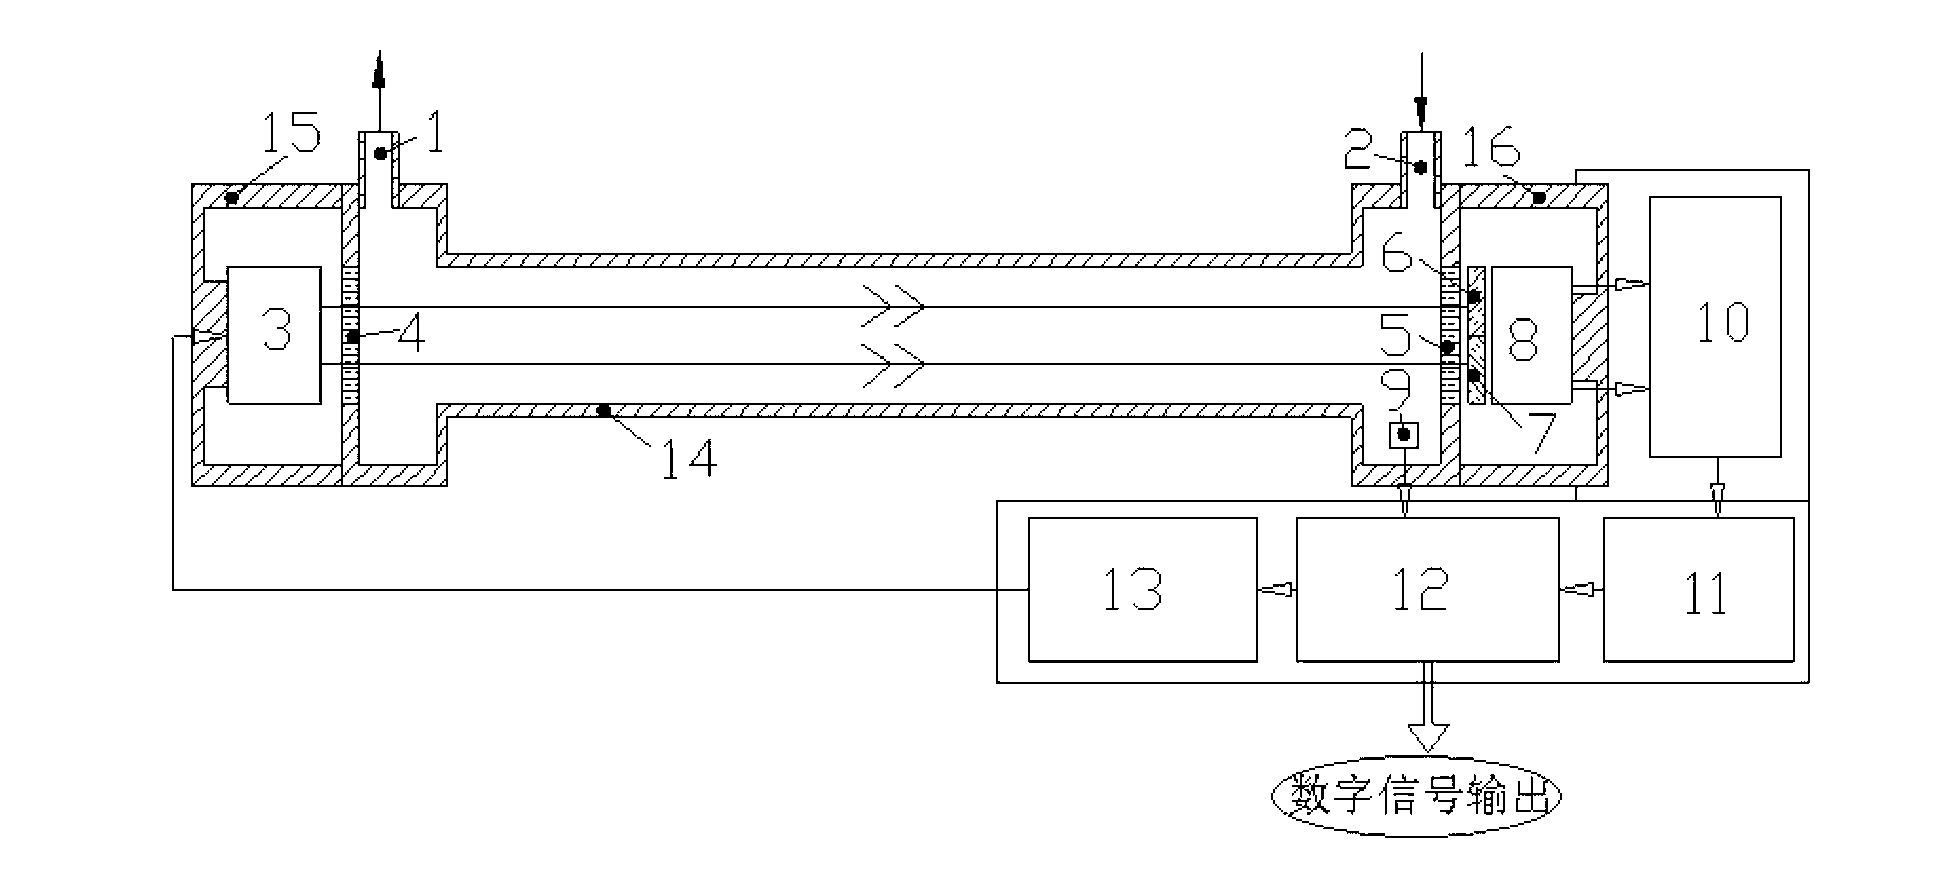 Suction type SF6 gas leakage monitoring device and method